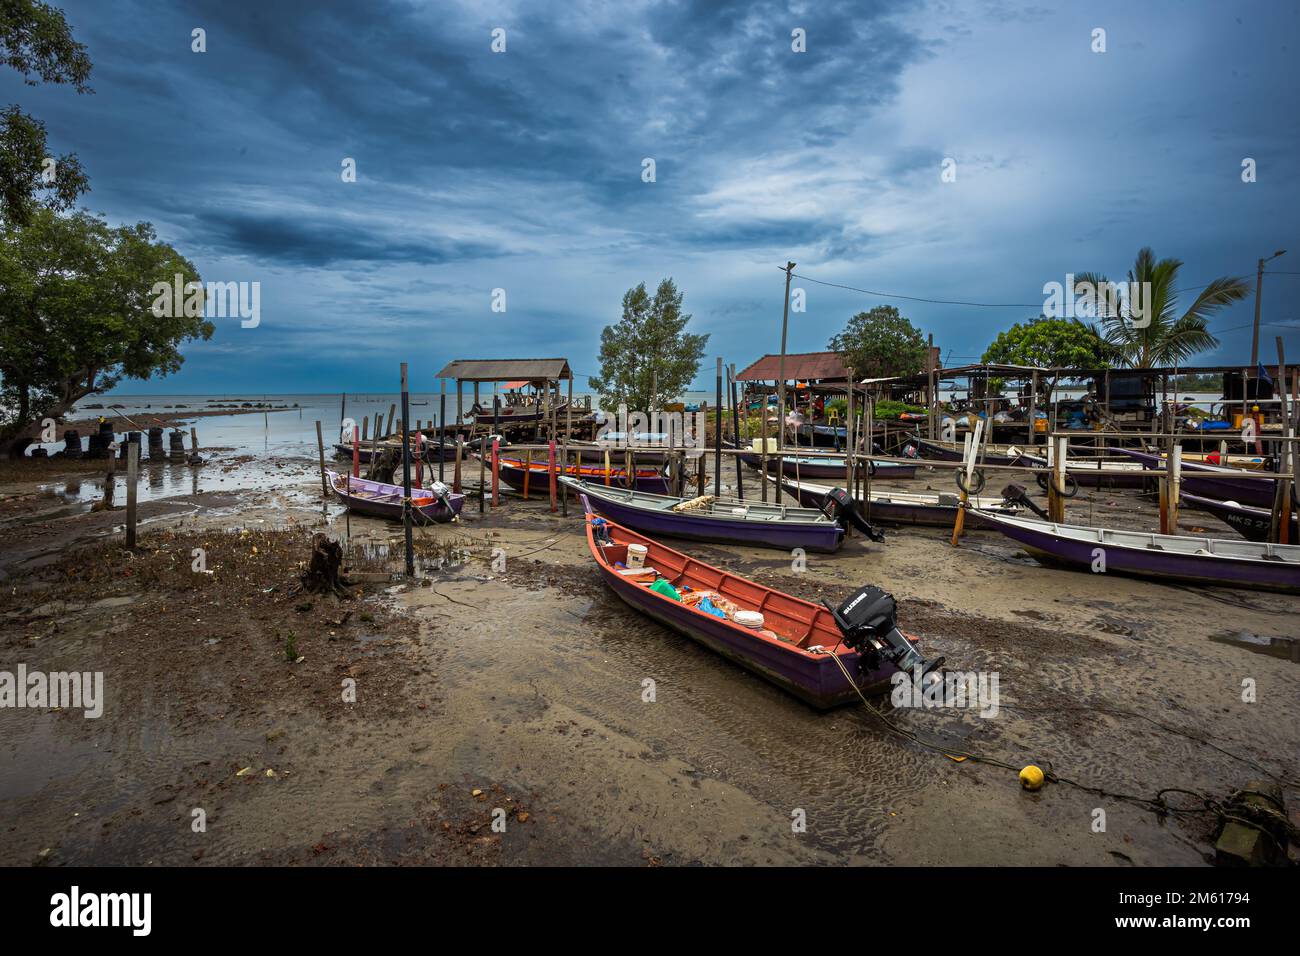 At low tide, fishing boats stand on the ground in a dry beach of a small fishing village in Malacca or Melaka, Peninsular Malaysia. Stock Photo